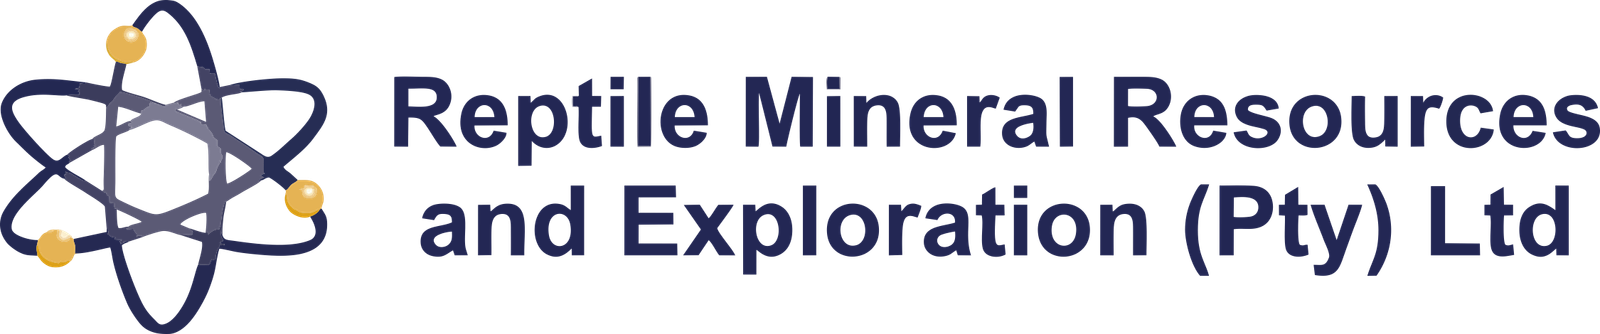 Reptile Mineral Resources and Exploration